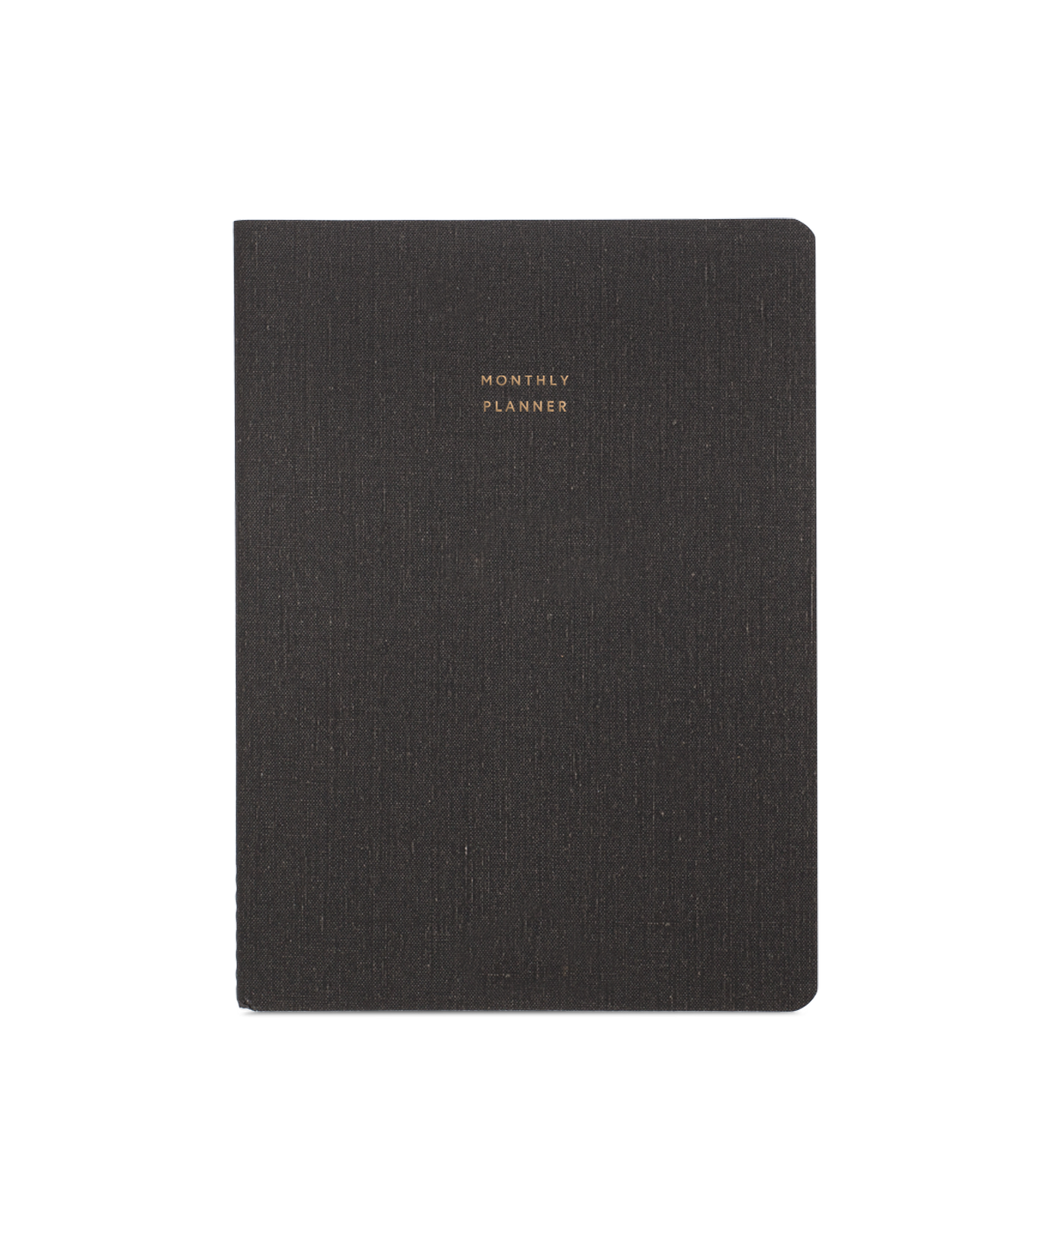 Stock image of the grey, textured Monthly Planner.